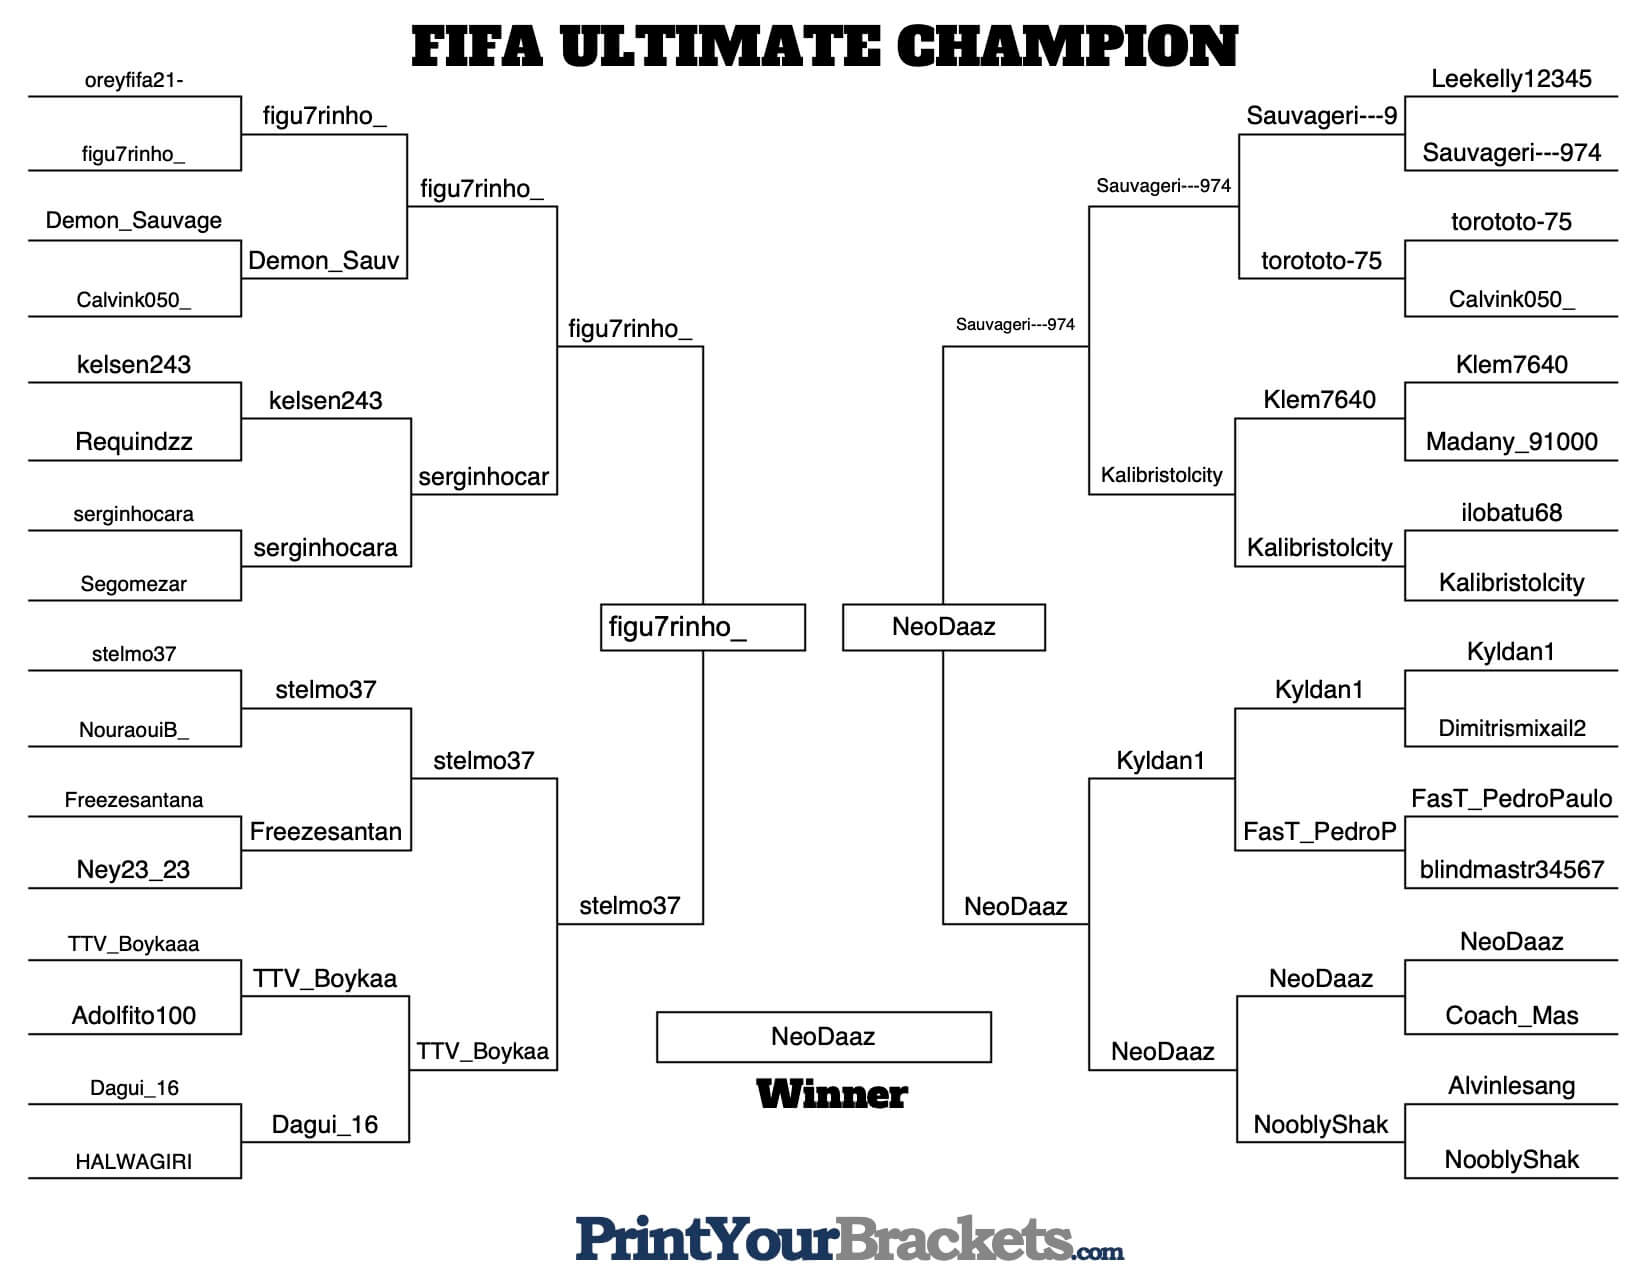 FIFA Ultimate Champion Final Results.jpg